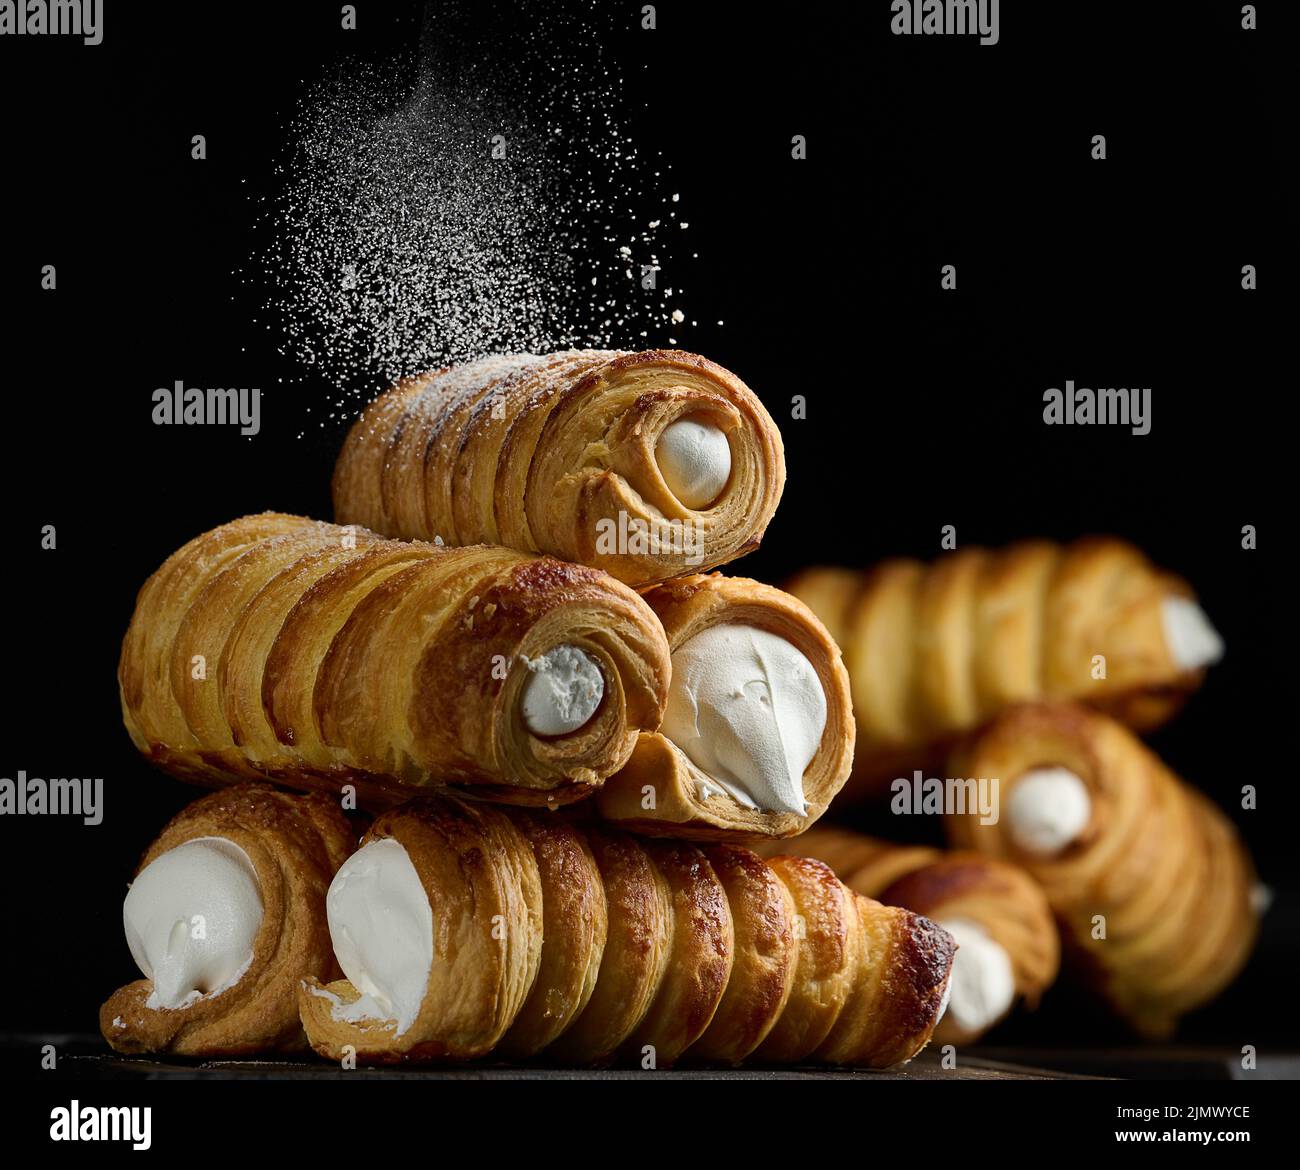 Baked tubules filled with whipped egg whites cream on a black wooden kitchen board Stock Photo